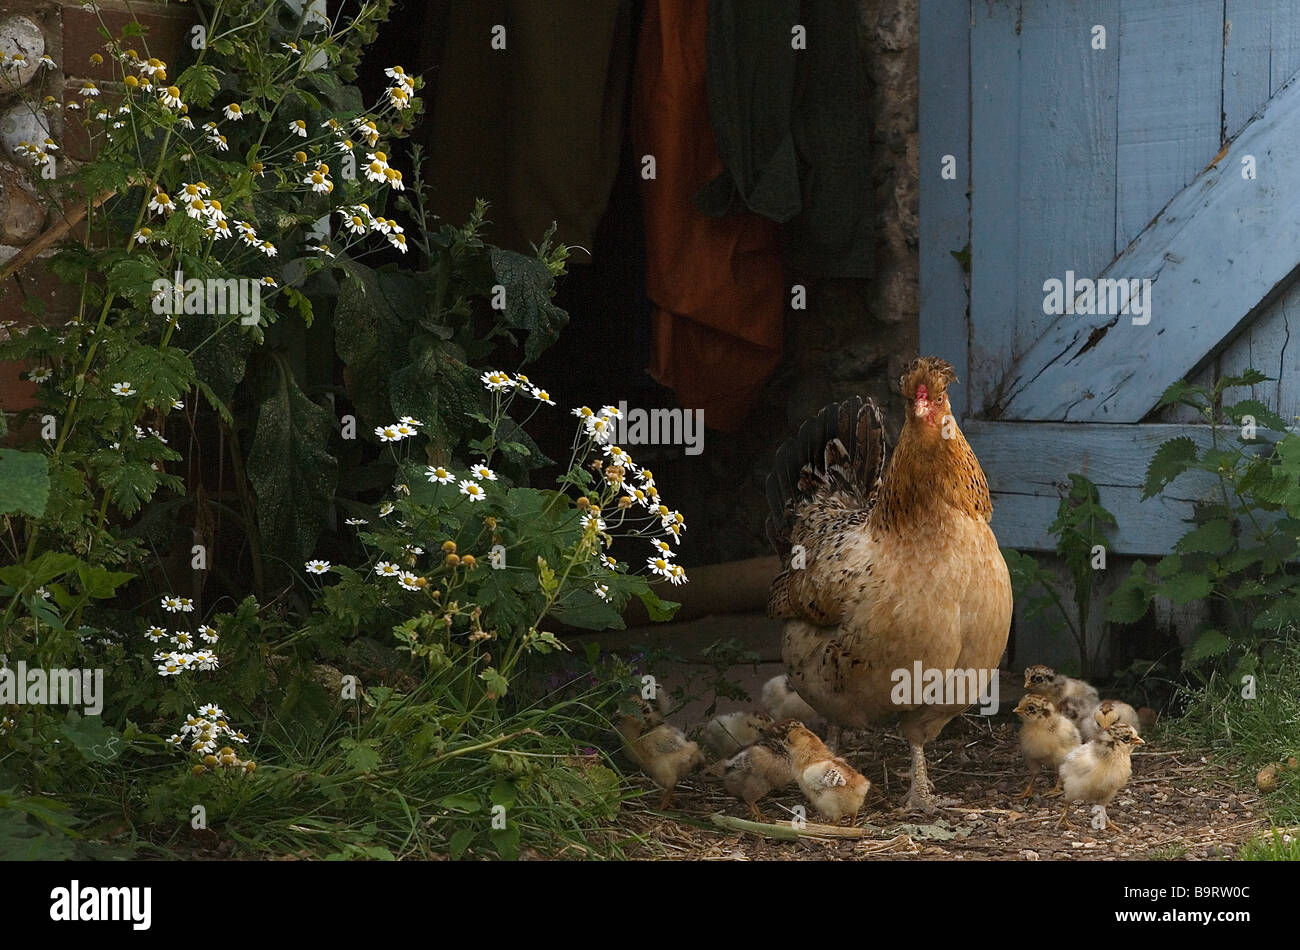 Hen with brood of young chicks in an idyllic rural setting Stock Photo